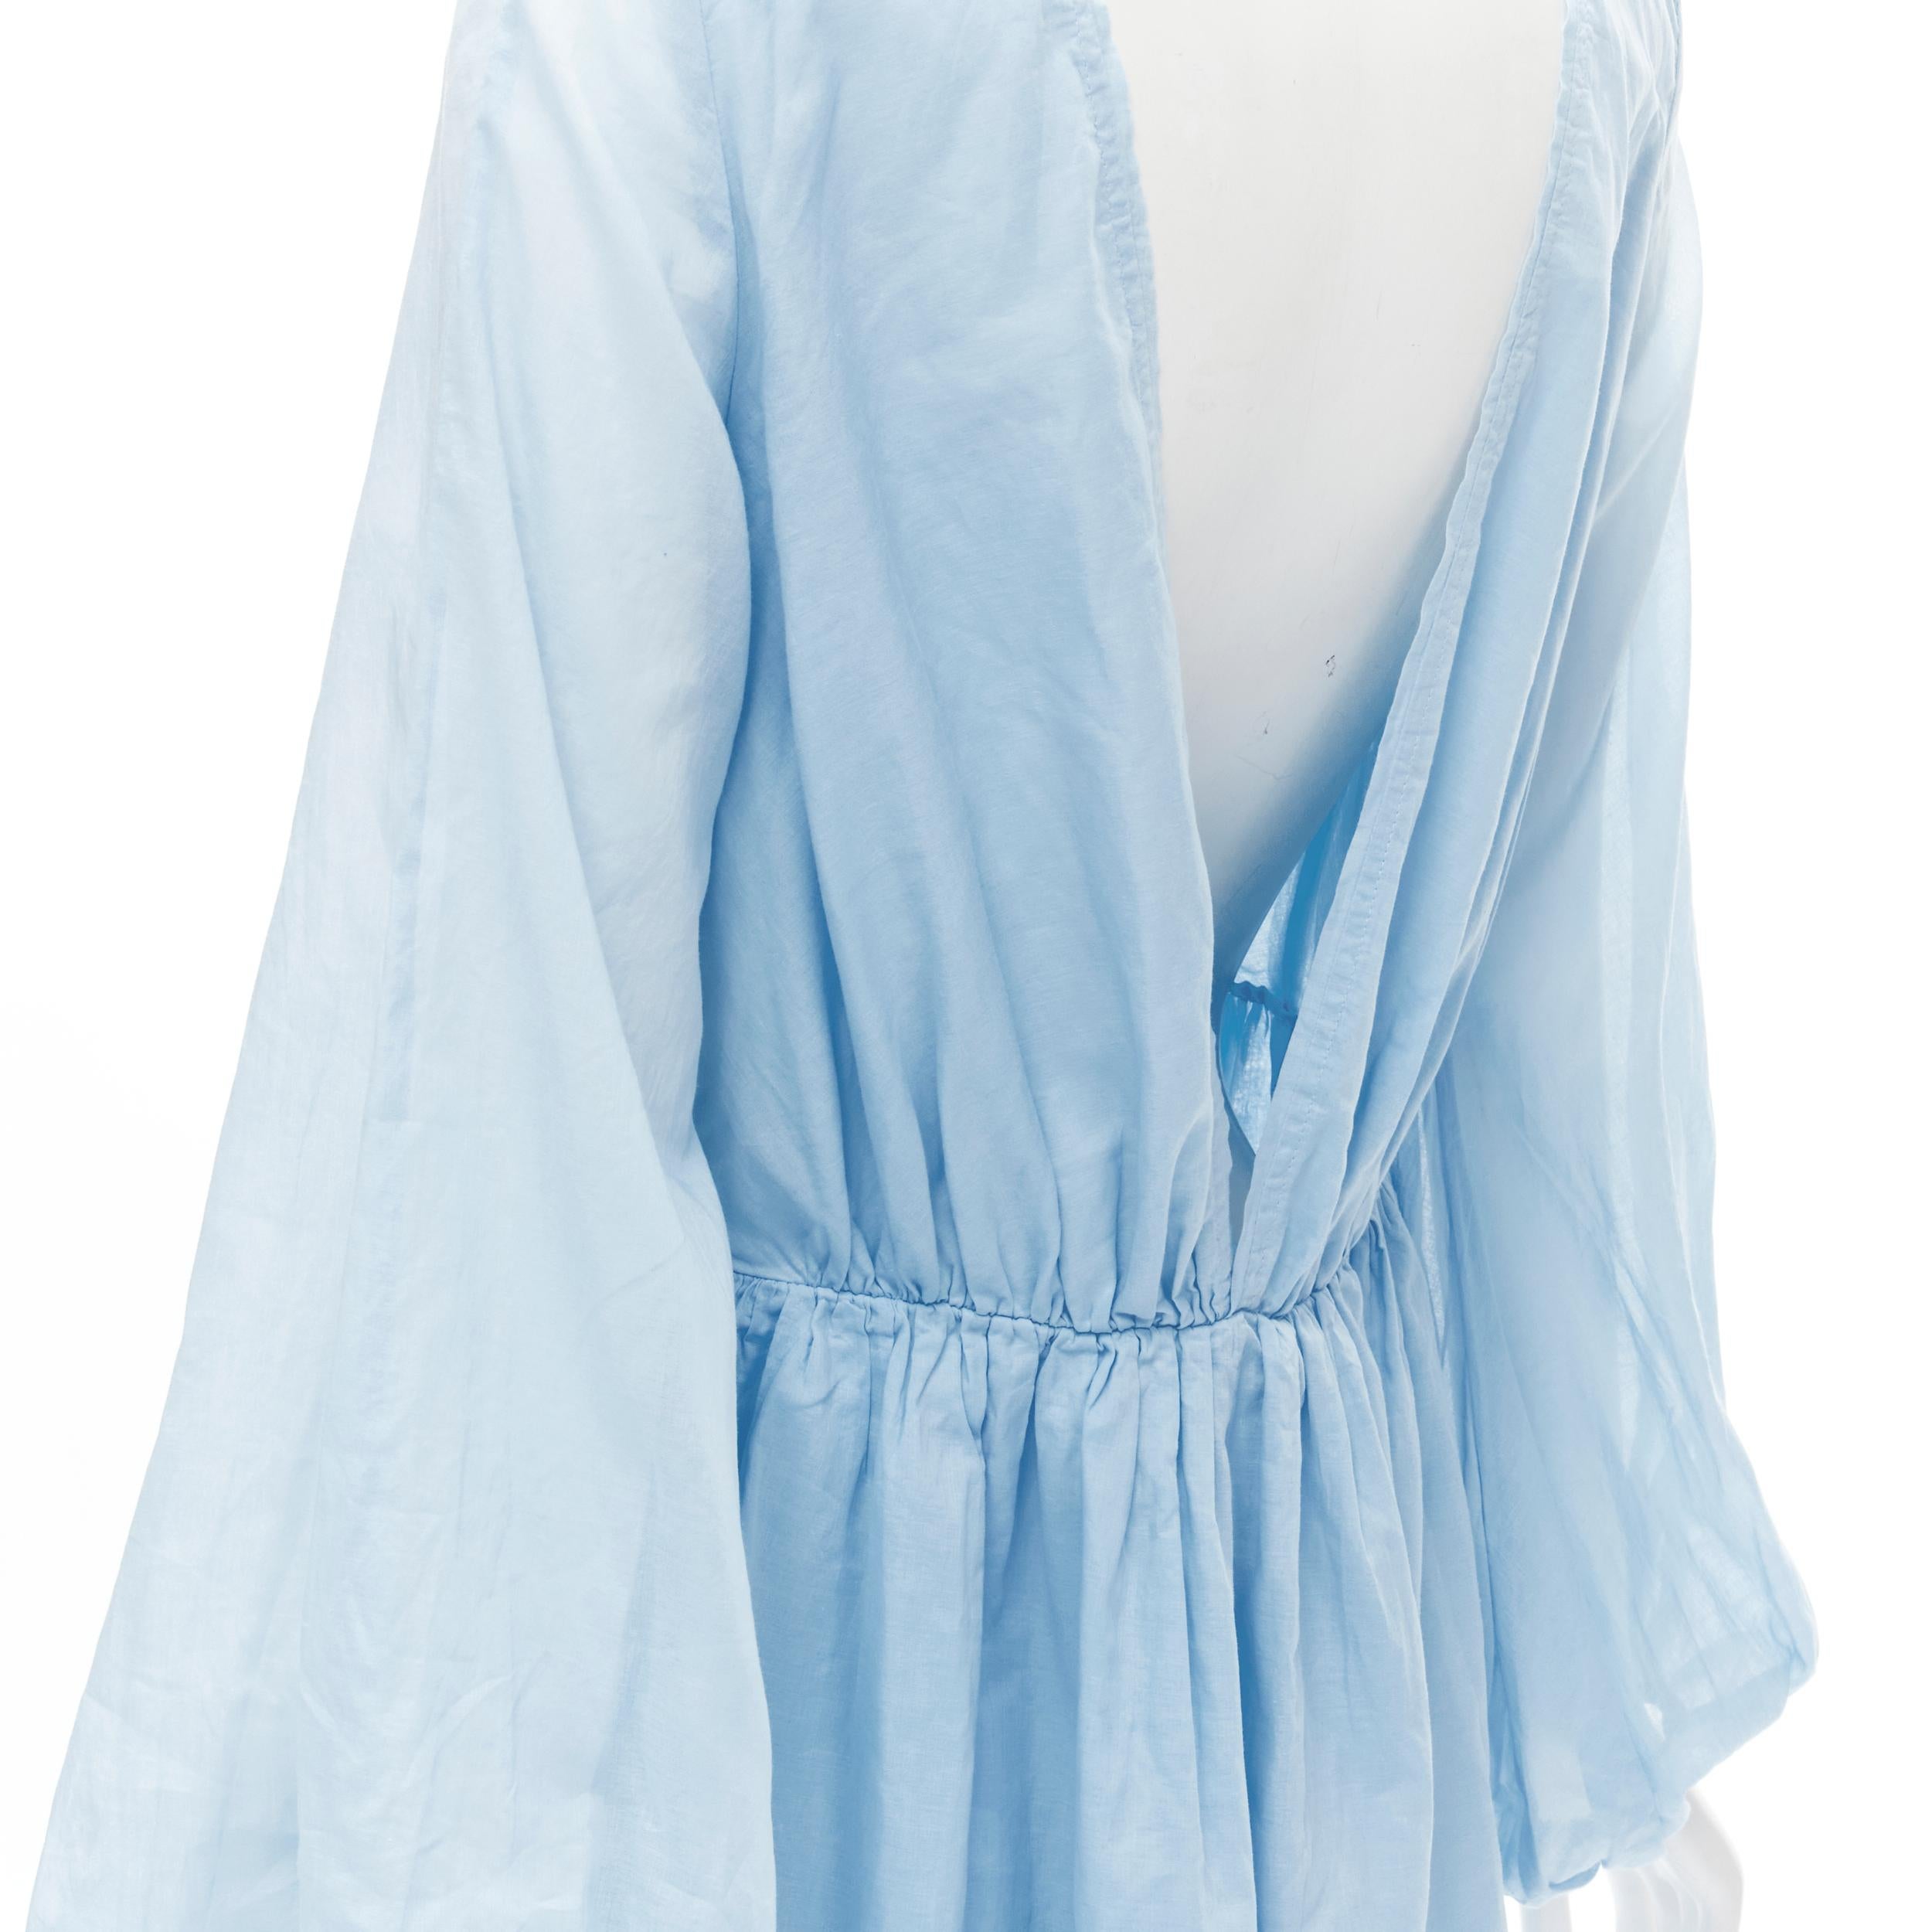 KALITA 100% cotton sky blue plunge neck bell sleeve short dress S/M
Brand: Kalita
Material: Cotton
Color: Blue
Pattern: Solid
Extra Detail: Plunge neck and back. Elasticated cuff.
Made in: Bali

CONDITION:
Condition: New with tags. 
Comes with: